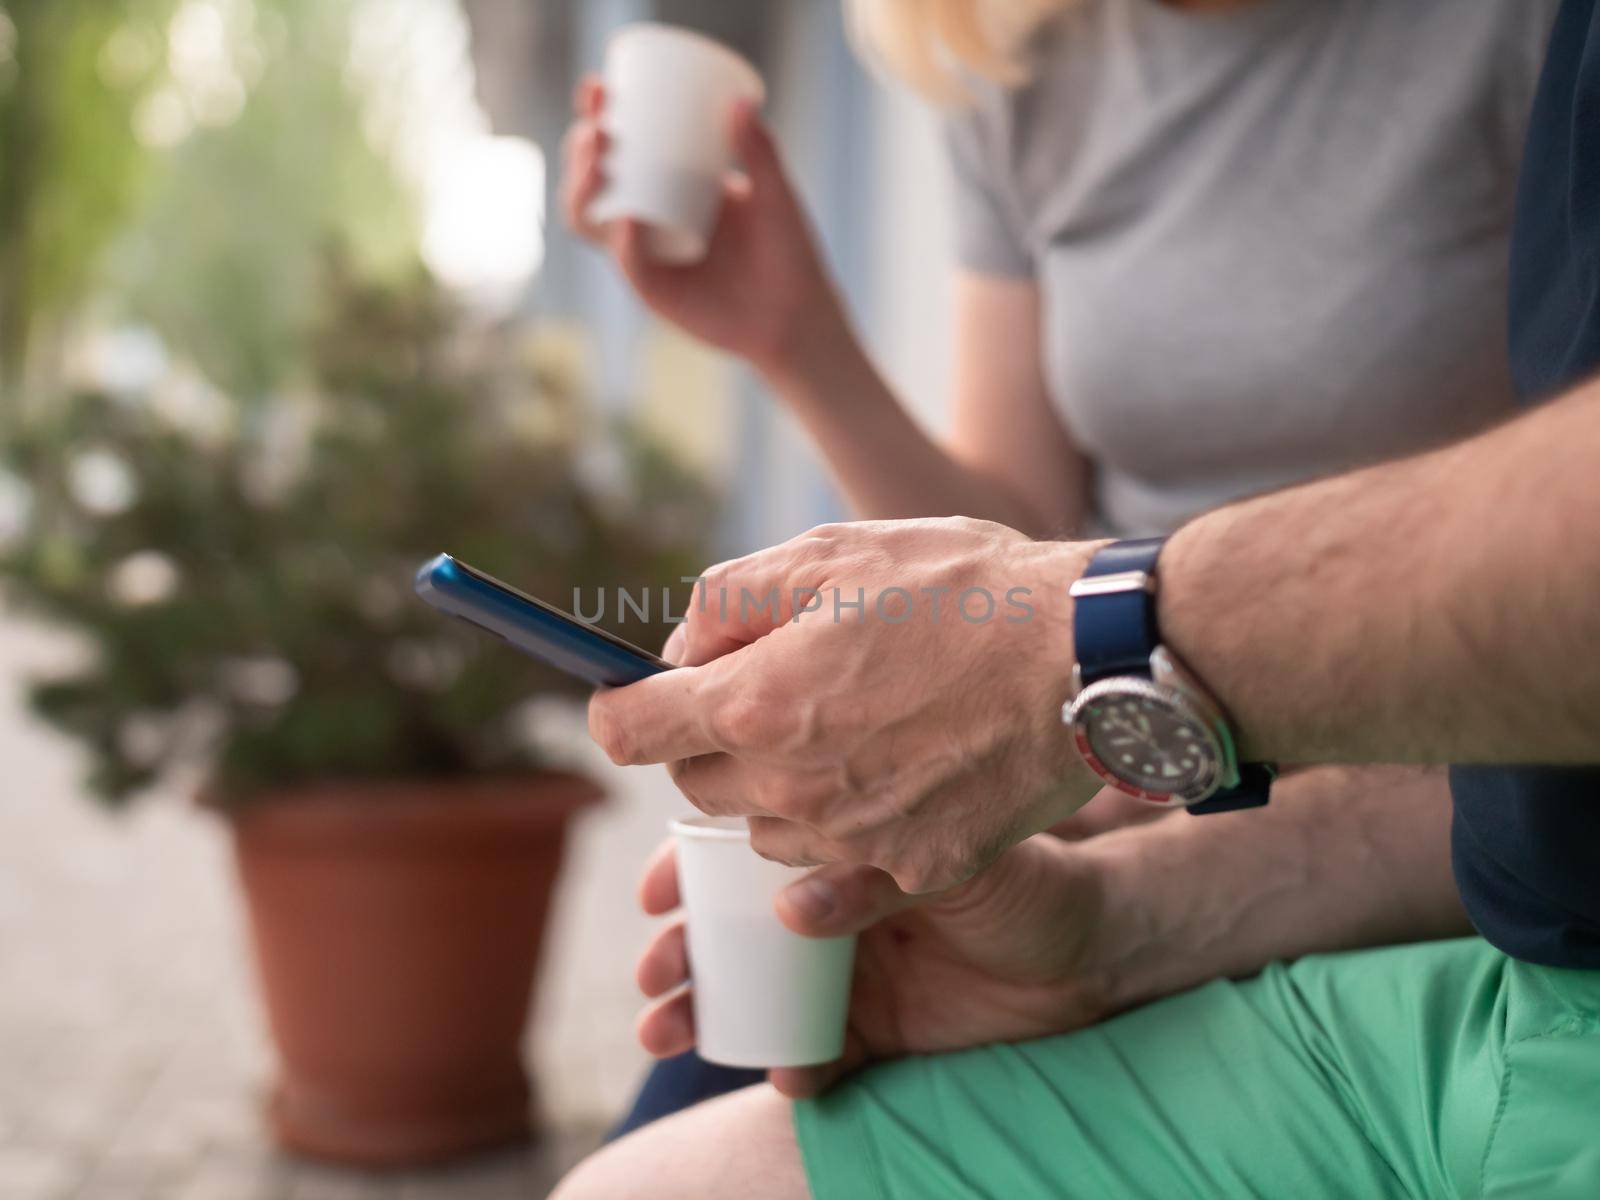 A couple of men and women look at the smartphone screen during a coffee break in a street restaurant. Close-up of male hands holding a smartphone.